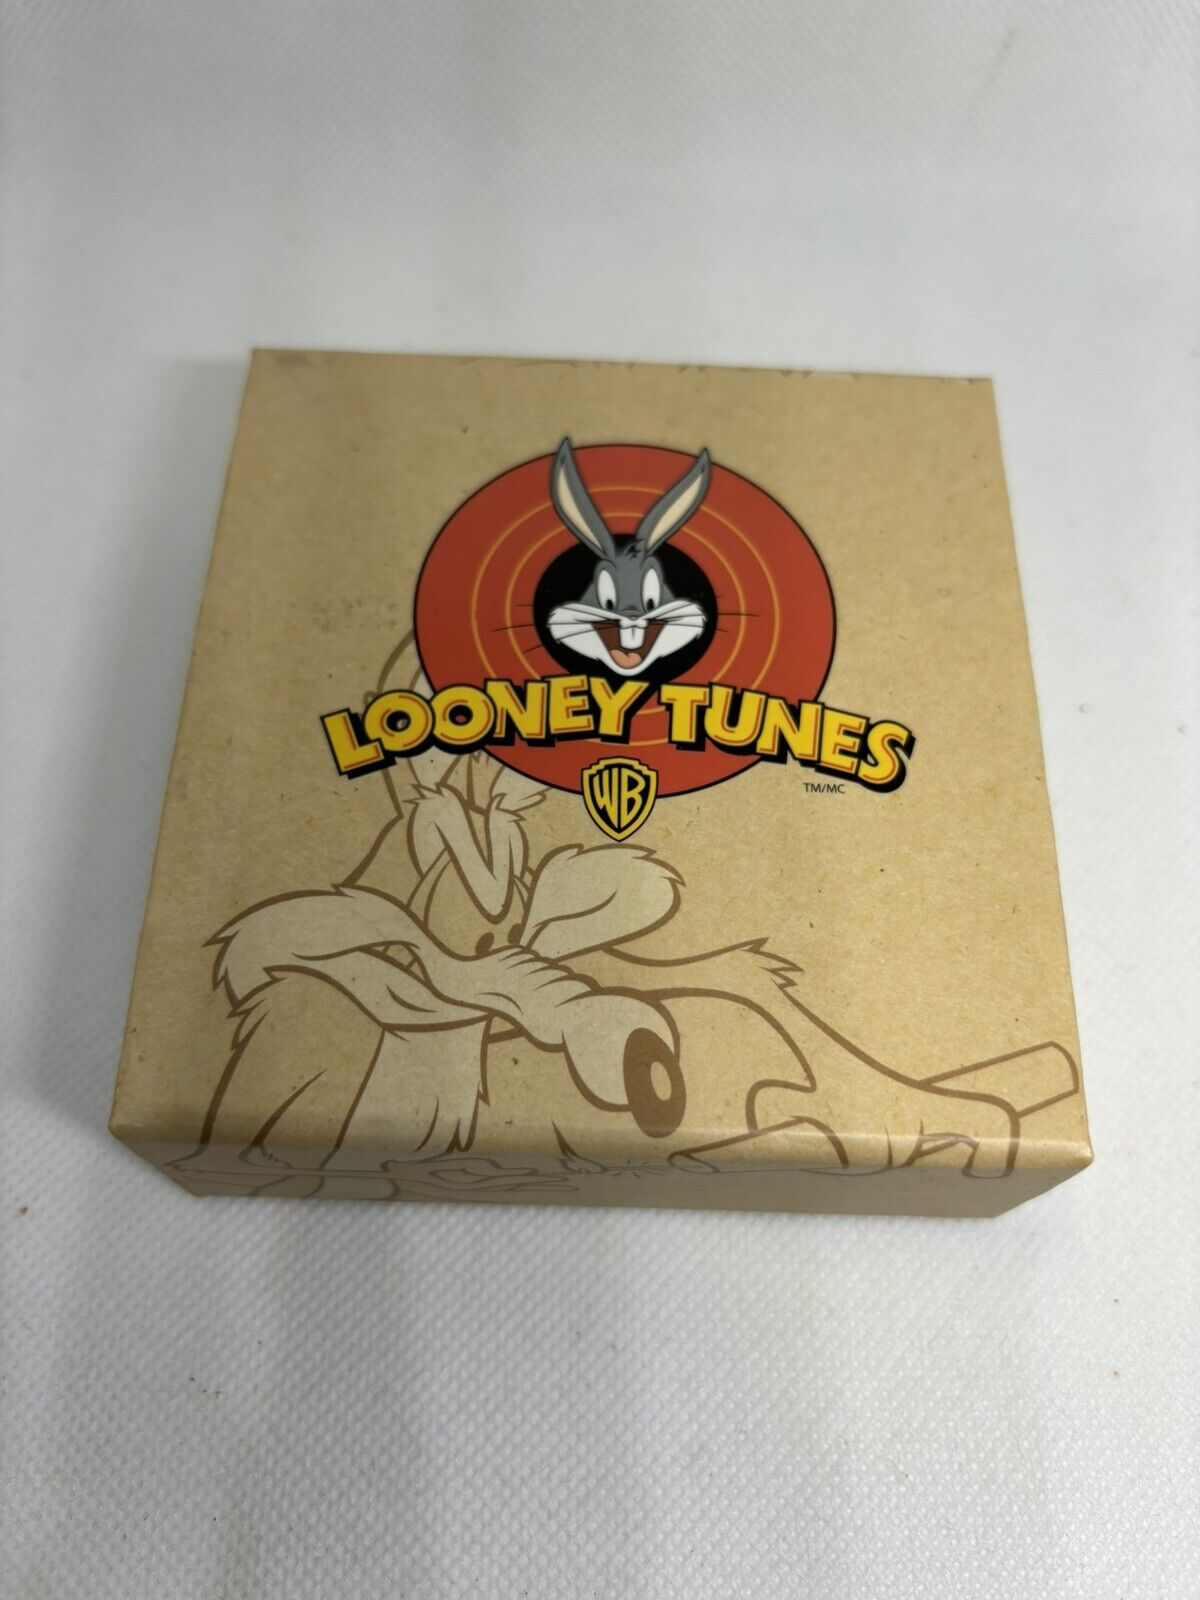 🔥 2015 - Loony Tunes “Wile E. Coyote”  -BOX ONLY- 🔥